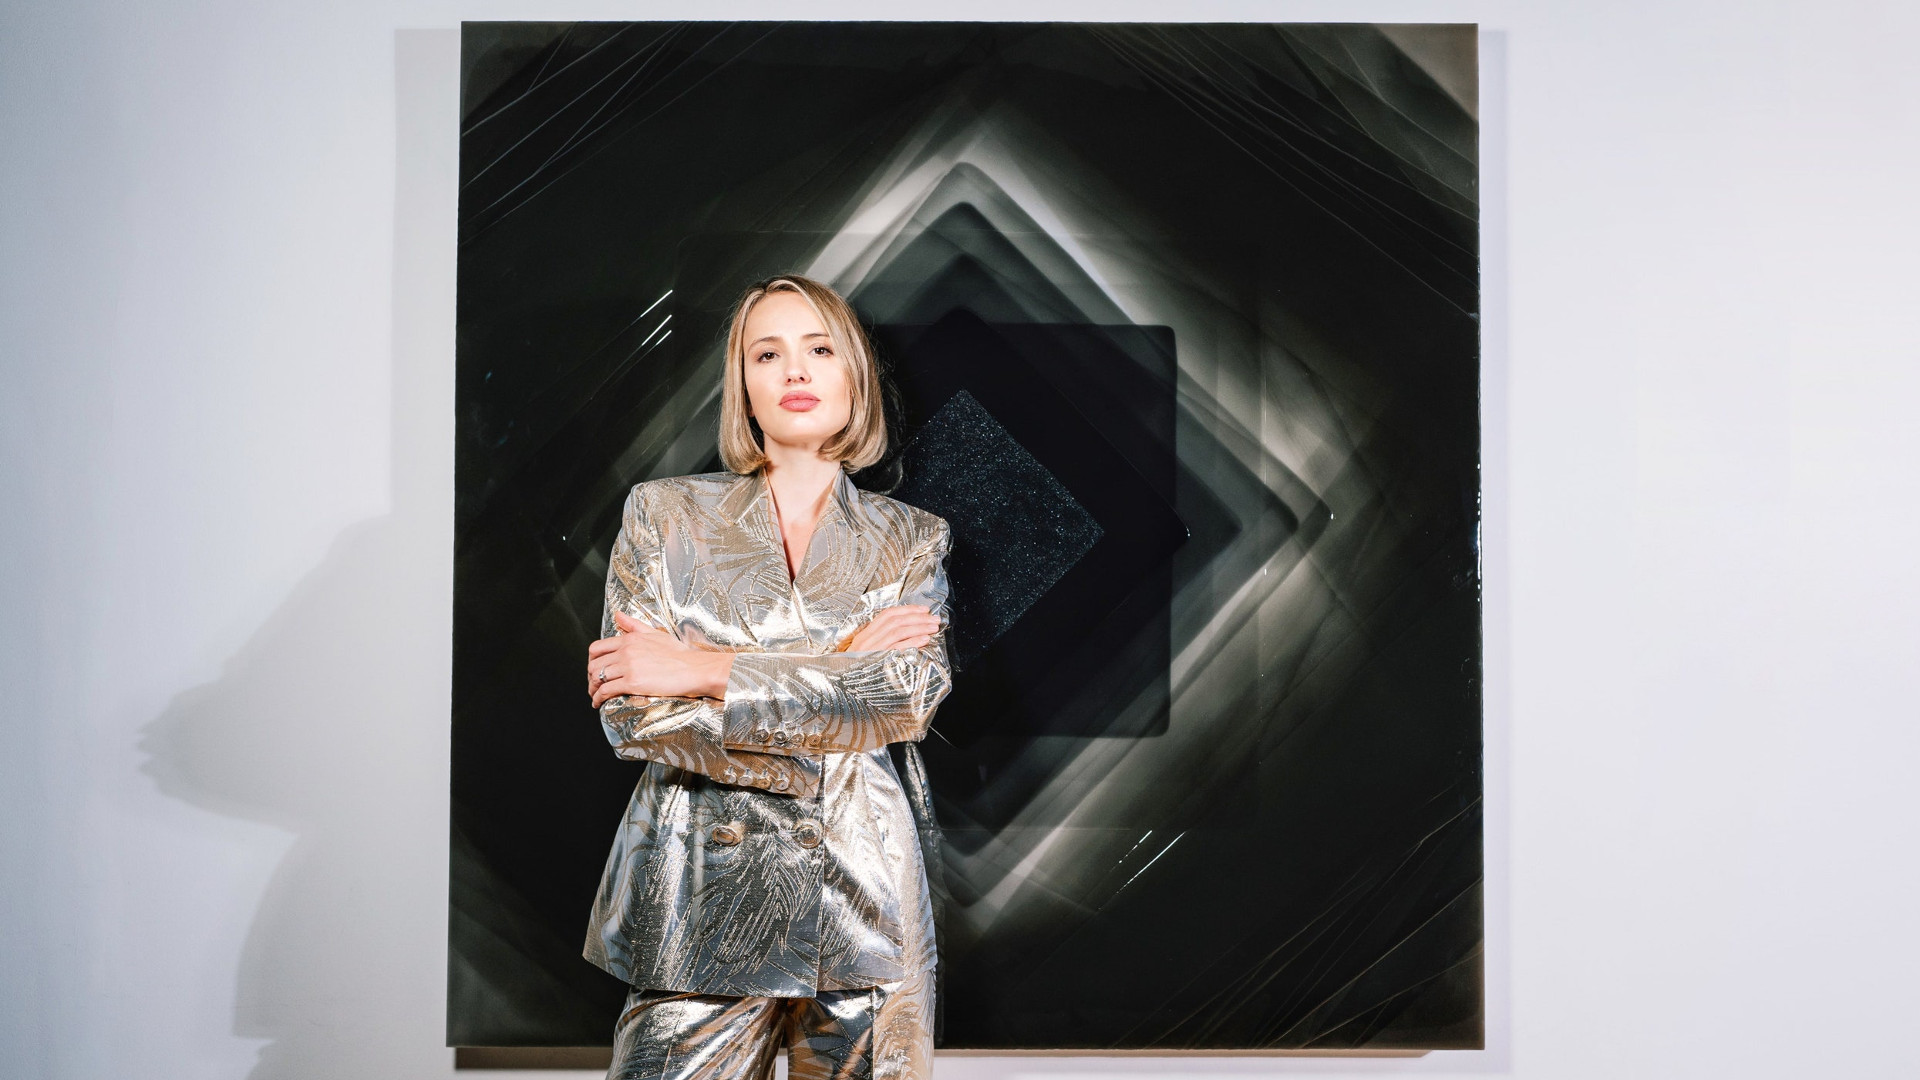 Artist Nat Bowen with "Black Diamond", the centrepiece of her 2020 collection "Back to Light" at the Saatchi Gallery